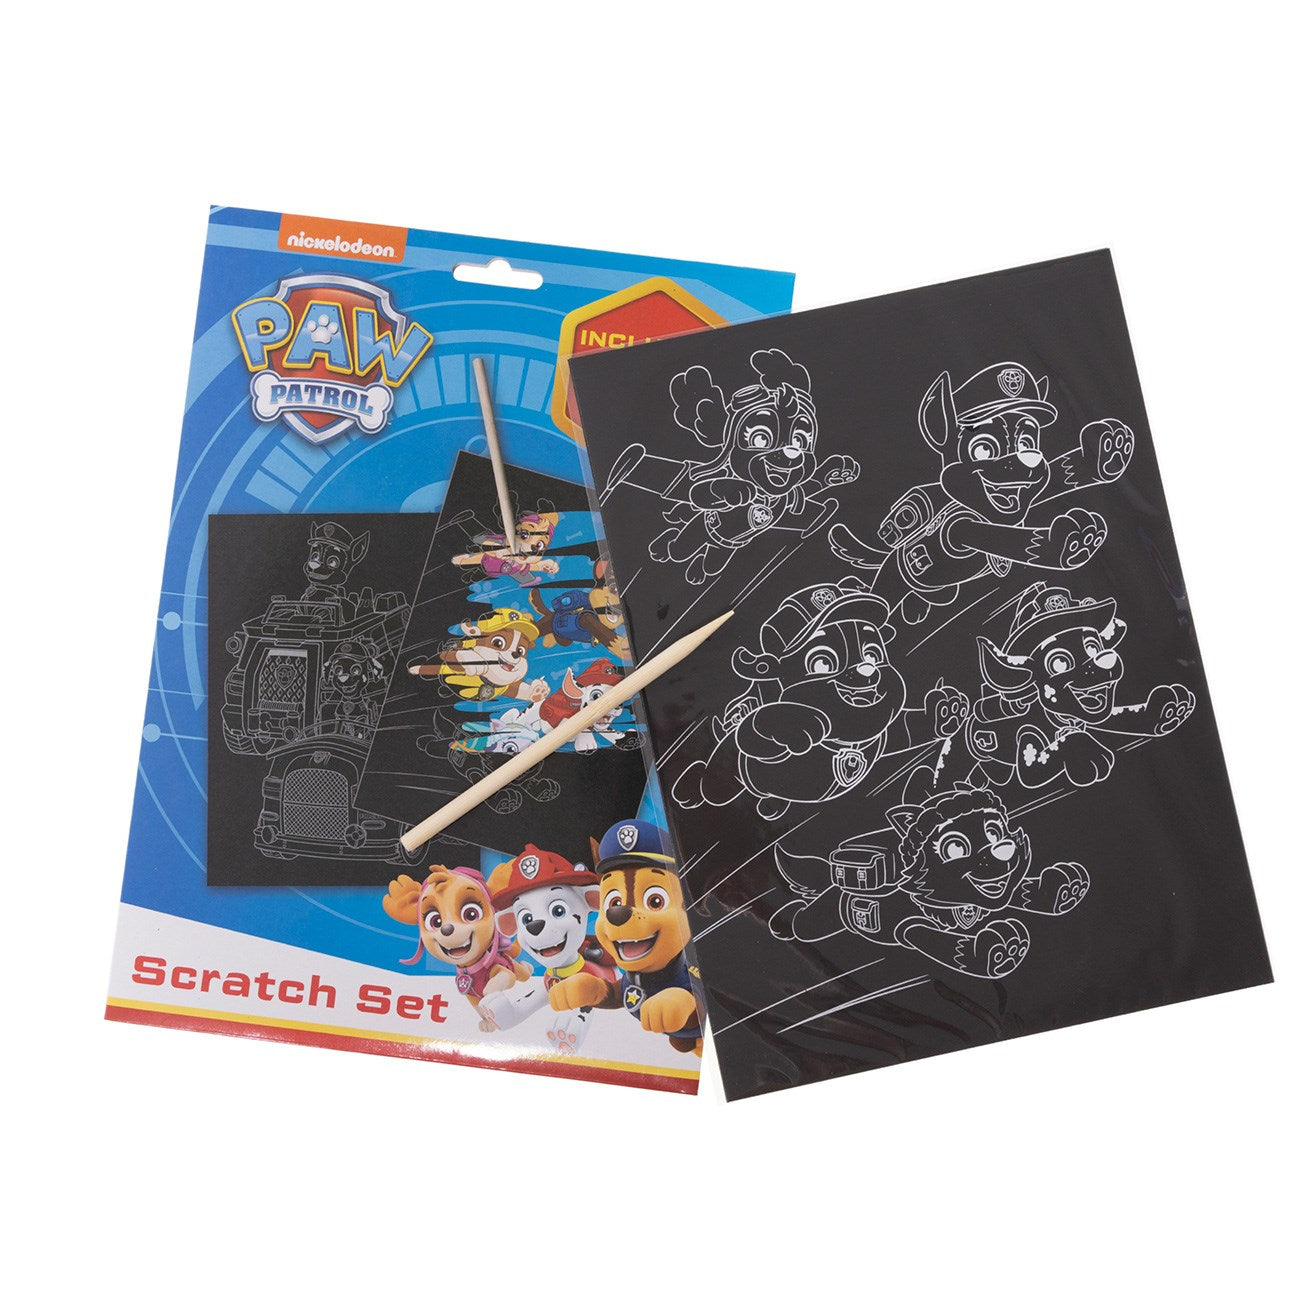 Euromic Paw Patrol Scratch Set with Wooden Pencil